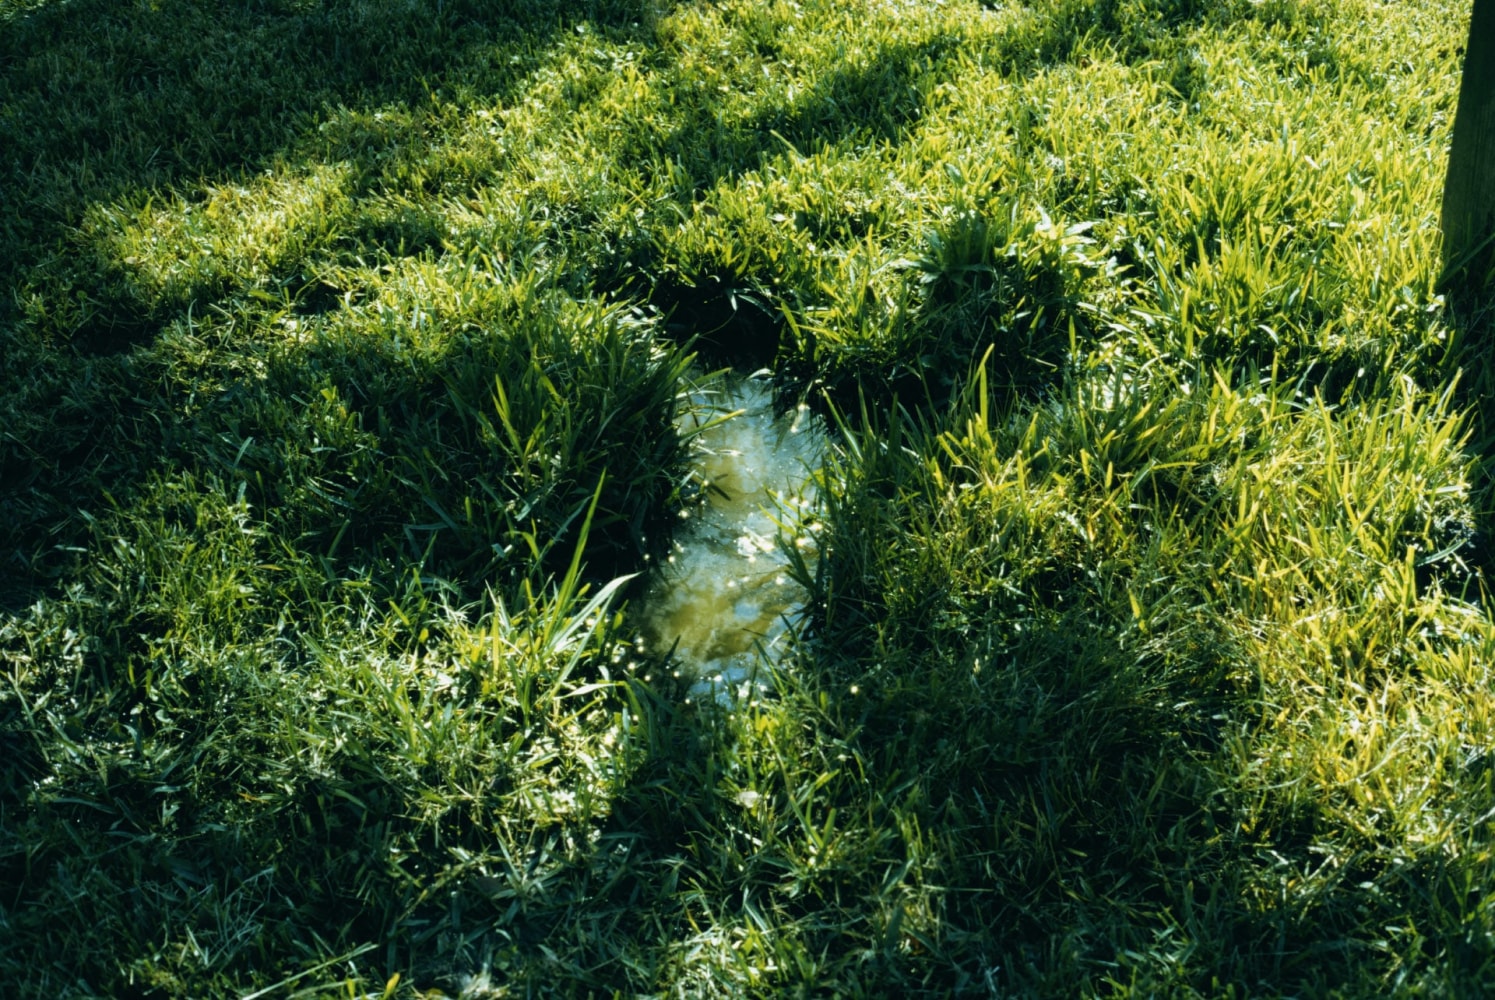 Untitled (Park Puddle), 2022

archival pigment print, edition of 3 + 2 AP

24&amp;nbsp;&amp;times; 36 in. / 61&amp;nbsp;&amp;times; 91.4 cm